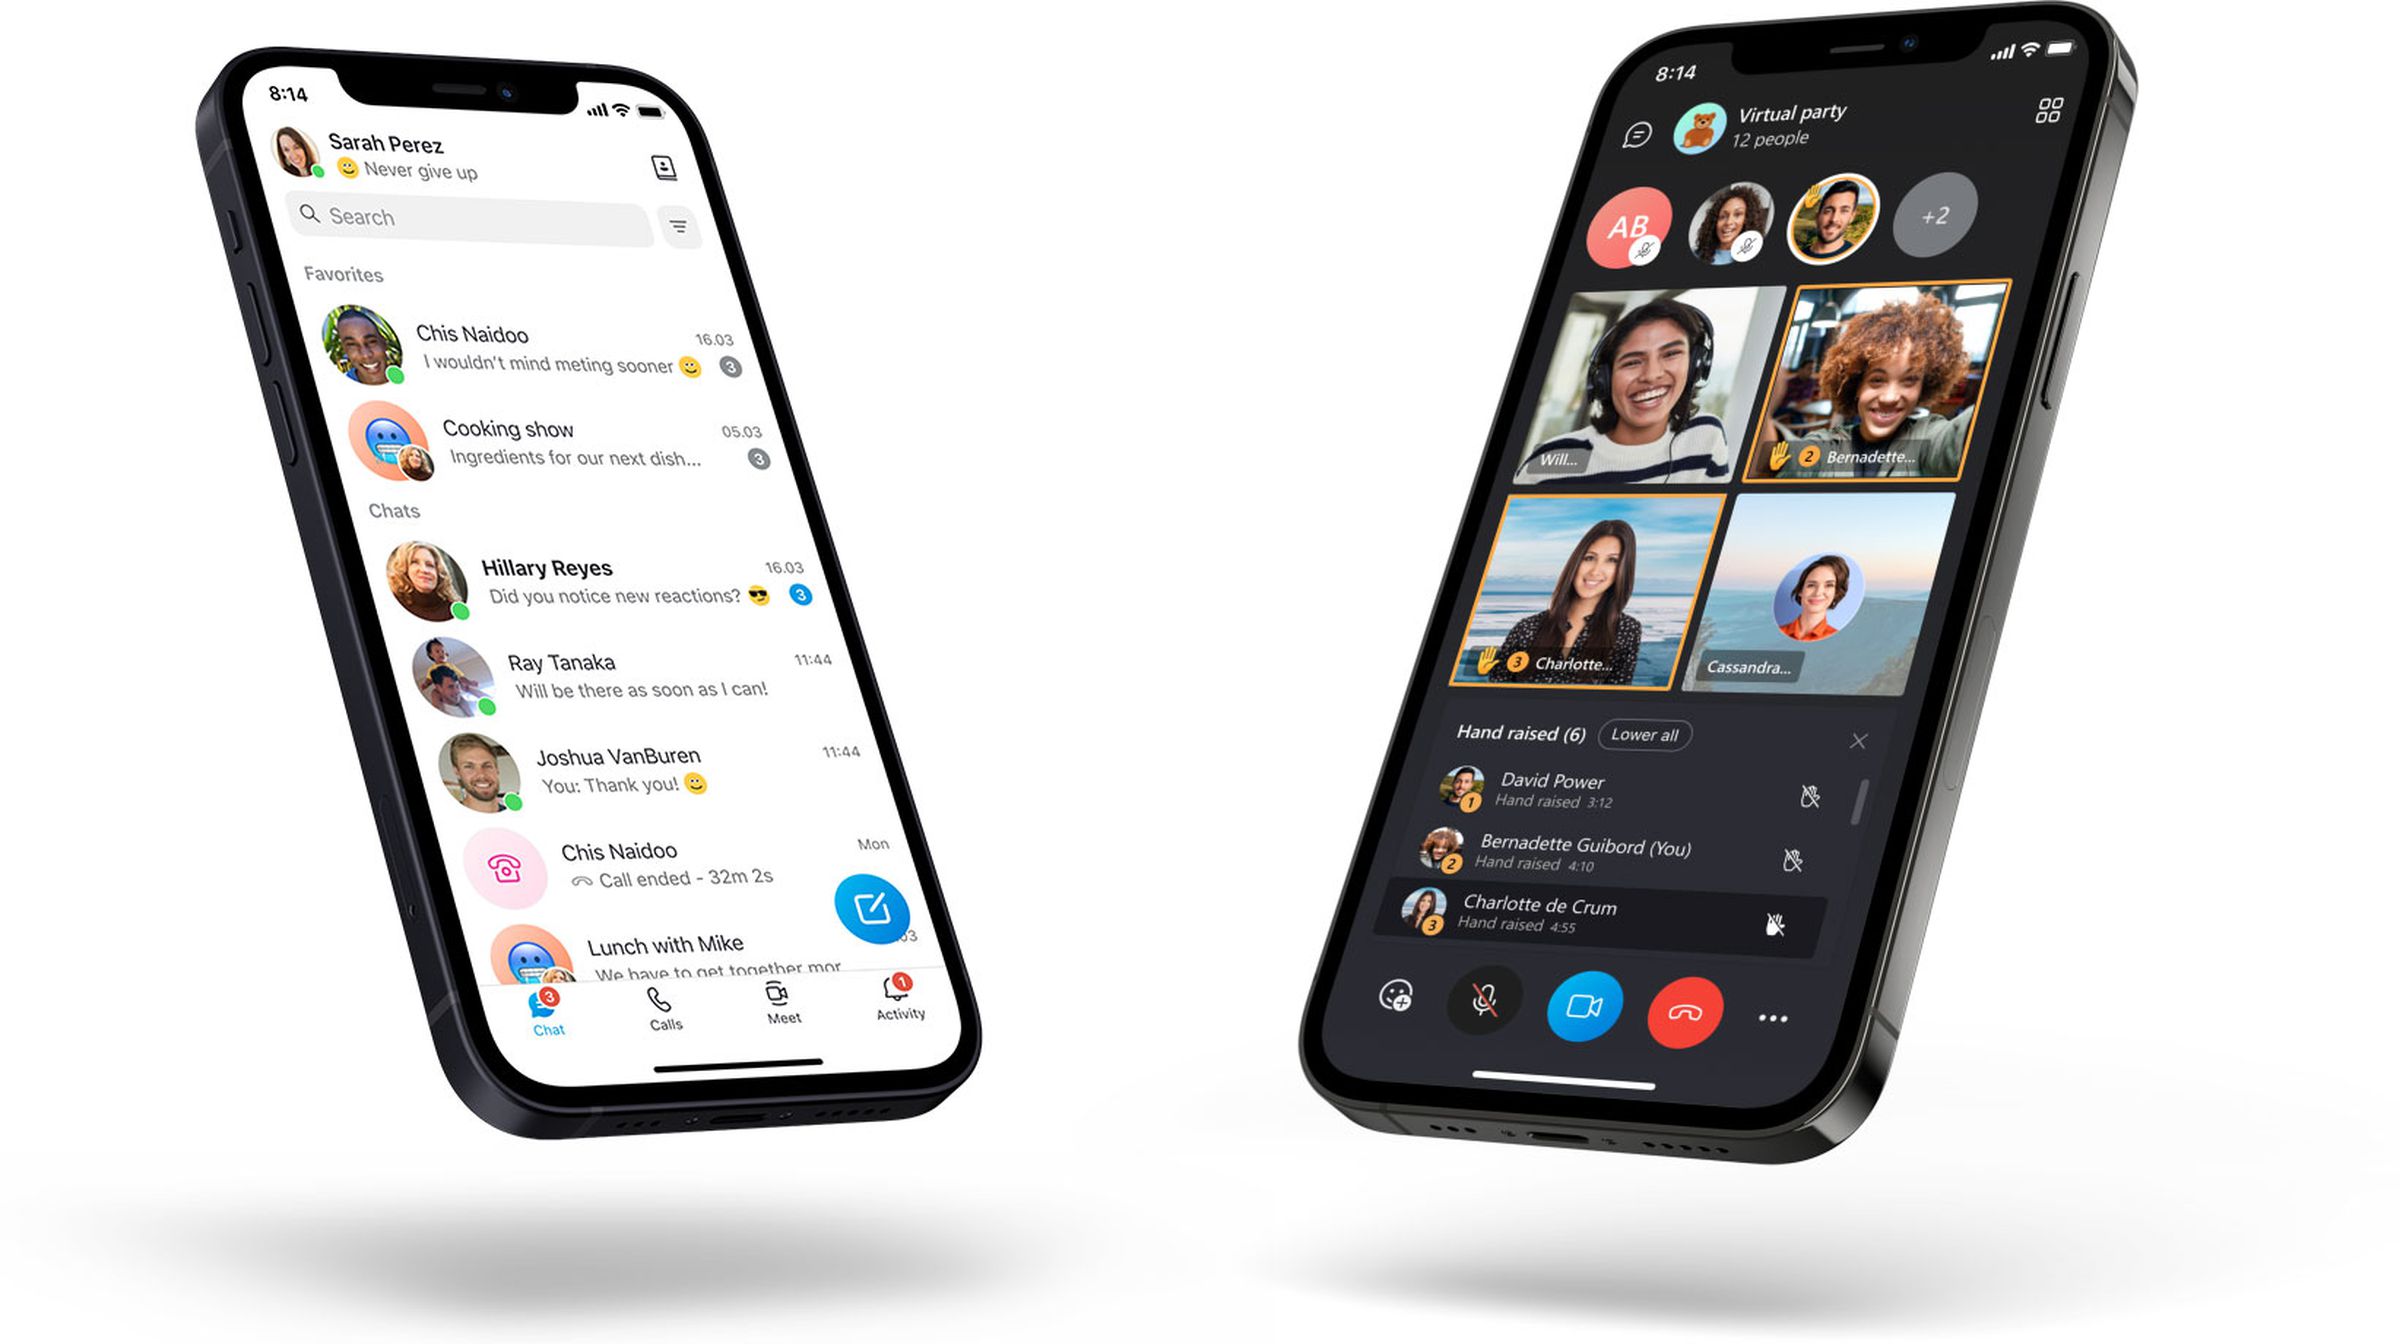 Skype on mobile is also getting some design improvements.